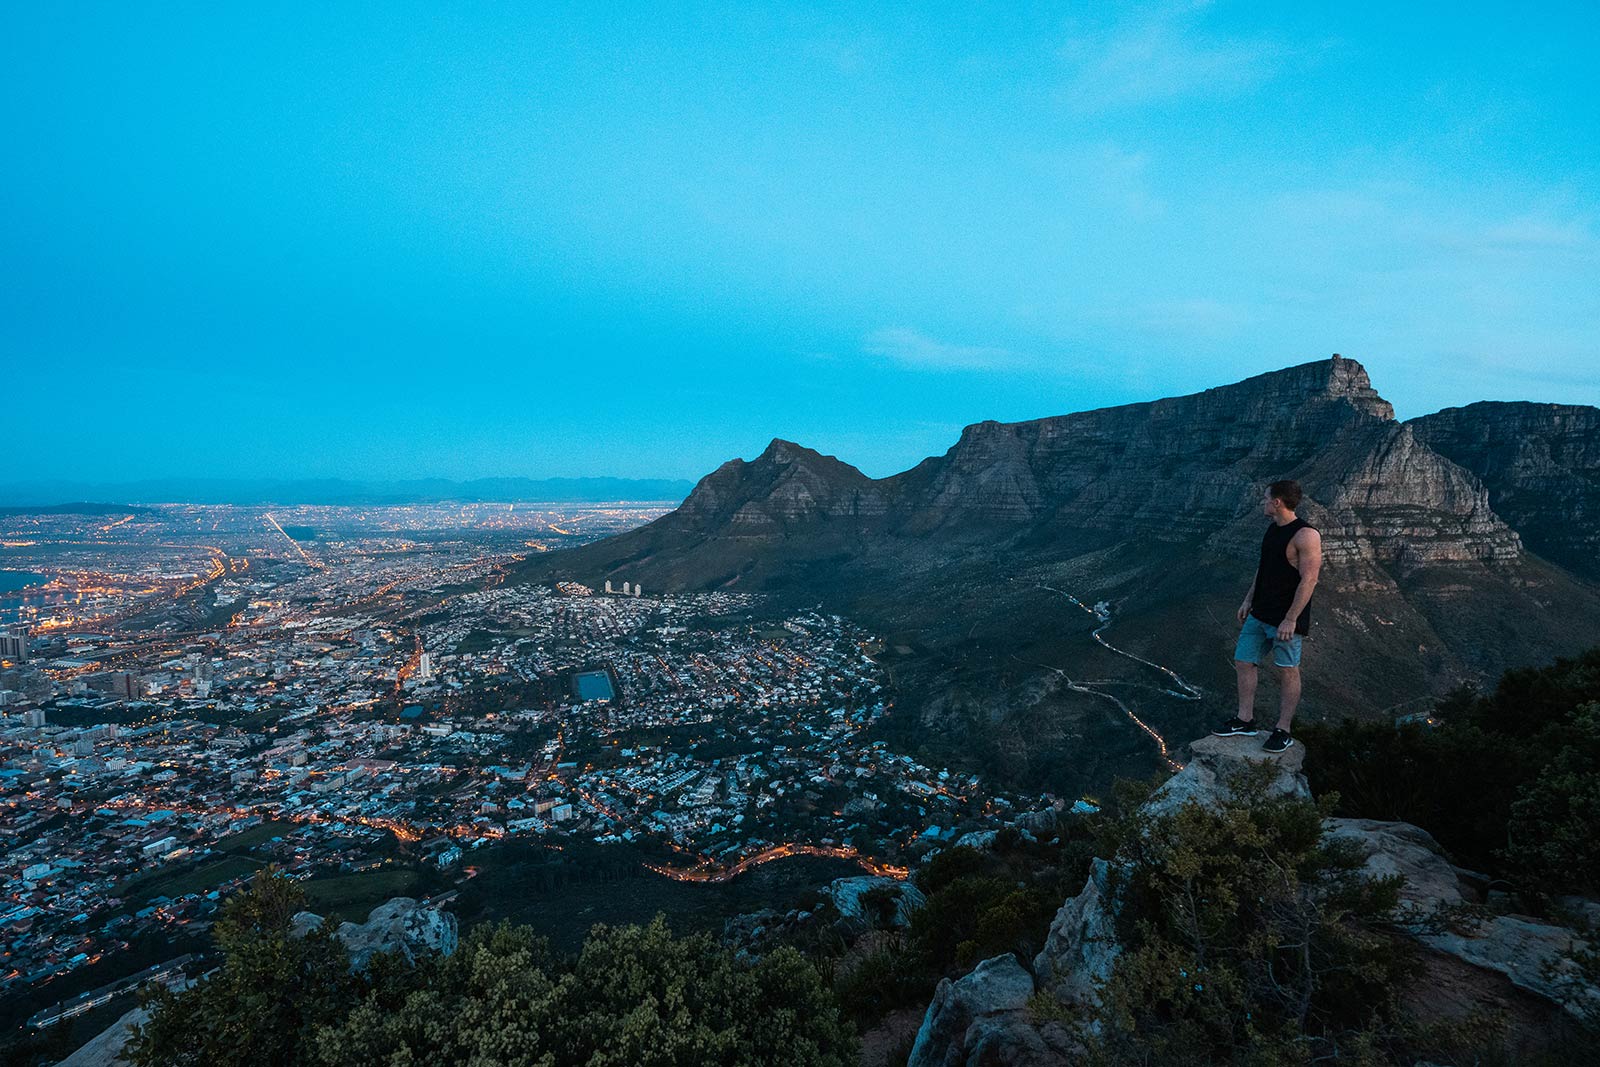 David Simpson on top of Lion's Head in Cape Town, South Africa. Running up Lion's head